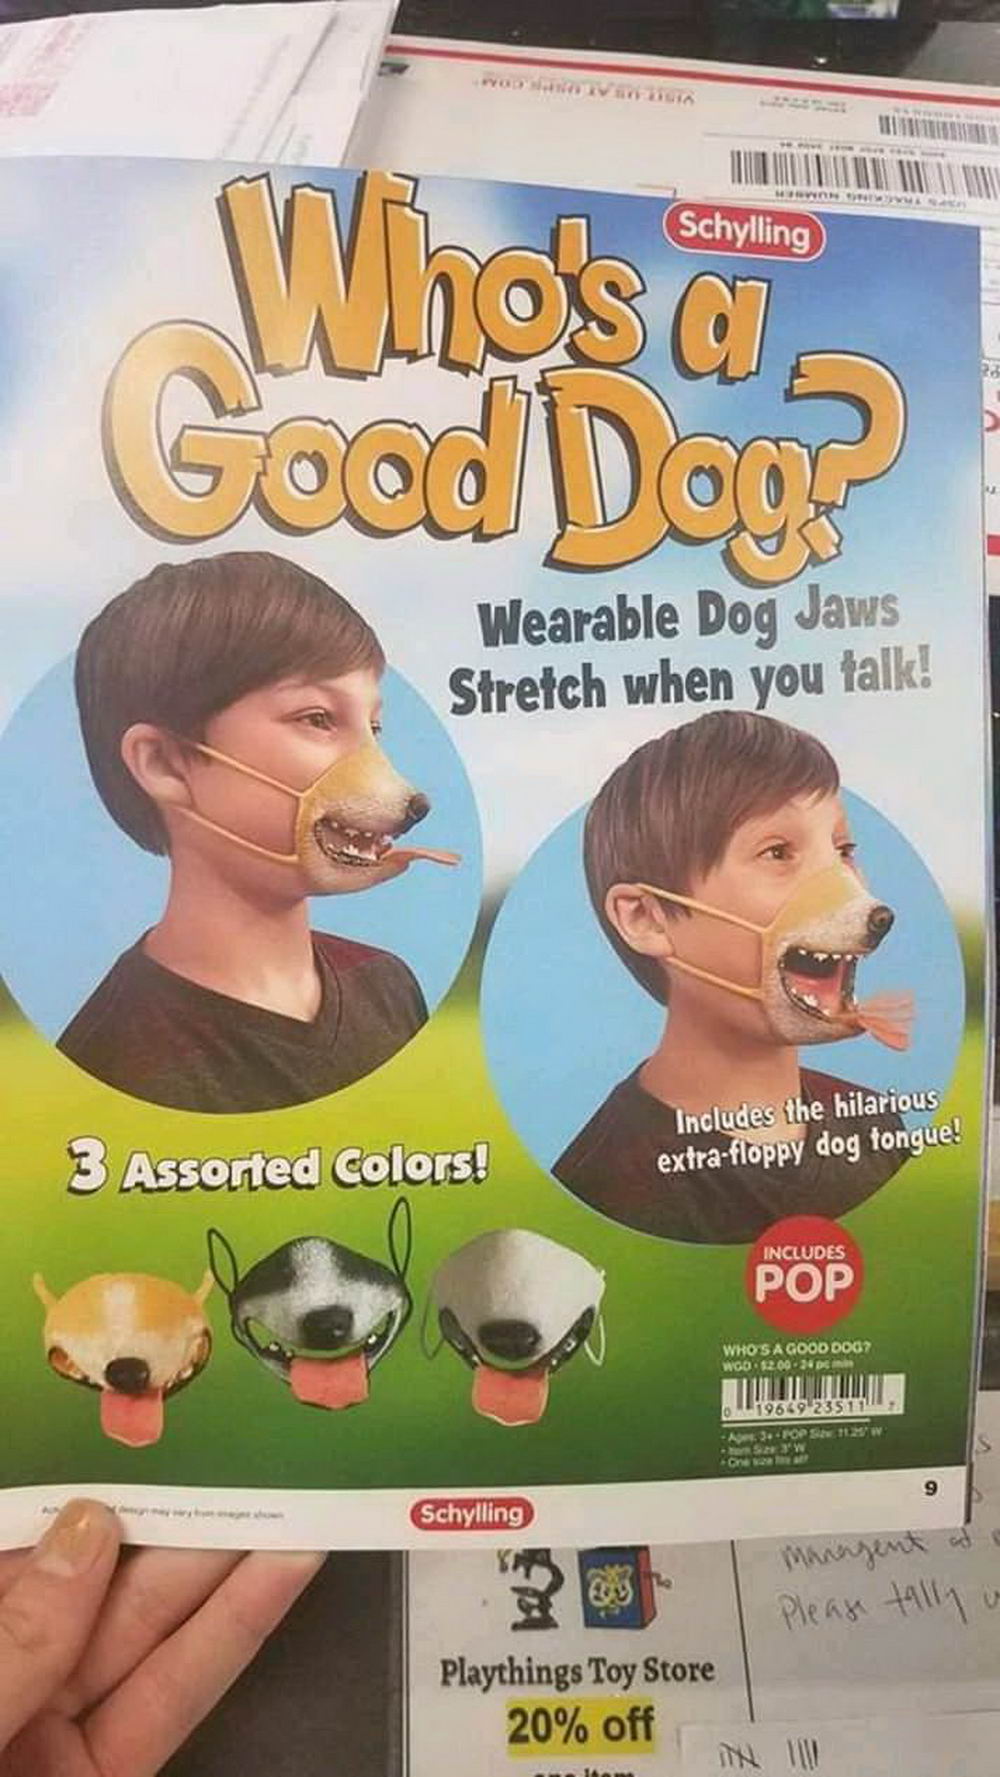 wearable dog jaws - Schylling Whos o Good Doo? Wearable Dog Jaws Stretch when you talk! 3 Assorted Colors! Includes the hilarious extrafloppy dog tongue! Includes Pop Who'S A Good Dog? Woo 22002 019669 23511 3.Fop W S Schylling Please tally u Playthings T